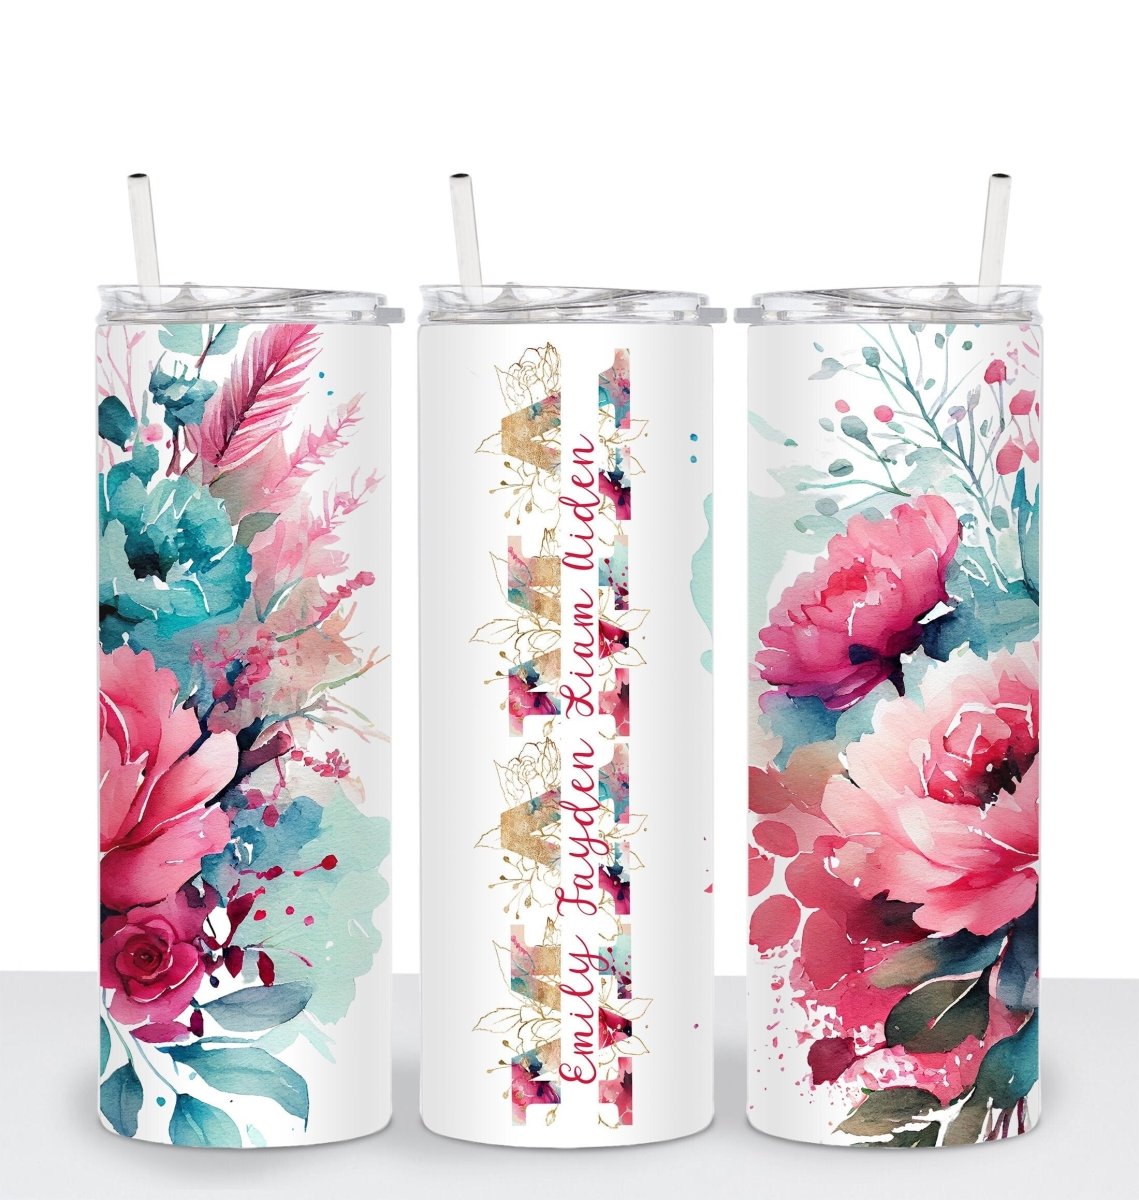 https://cdn.shopify.com/s/files/1/1936/6275/products/gift-for-mama-mama-tumbler-20oz-tumbler-gift-for-her-personalized-tumbler-mothers-day-gift-gift-for-birthday-mama-gifts-249450_1800x1800.jpg?v=1681962602